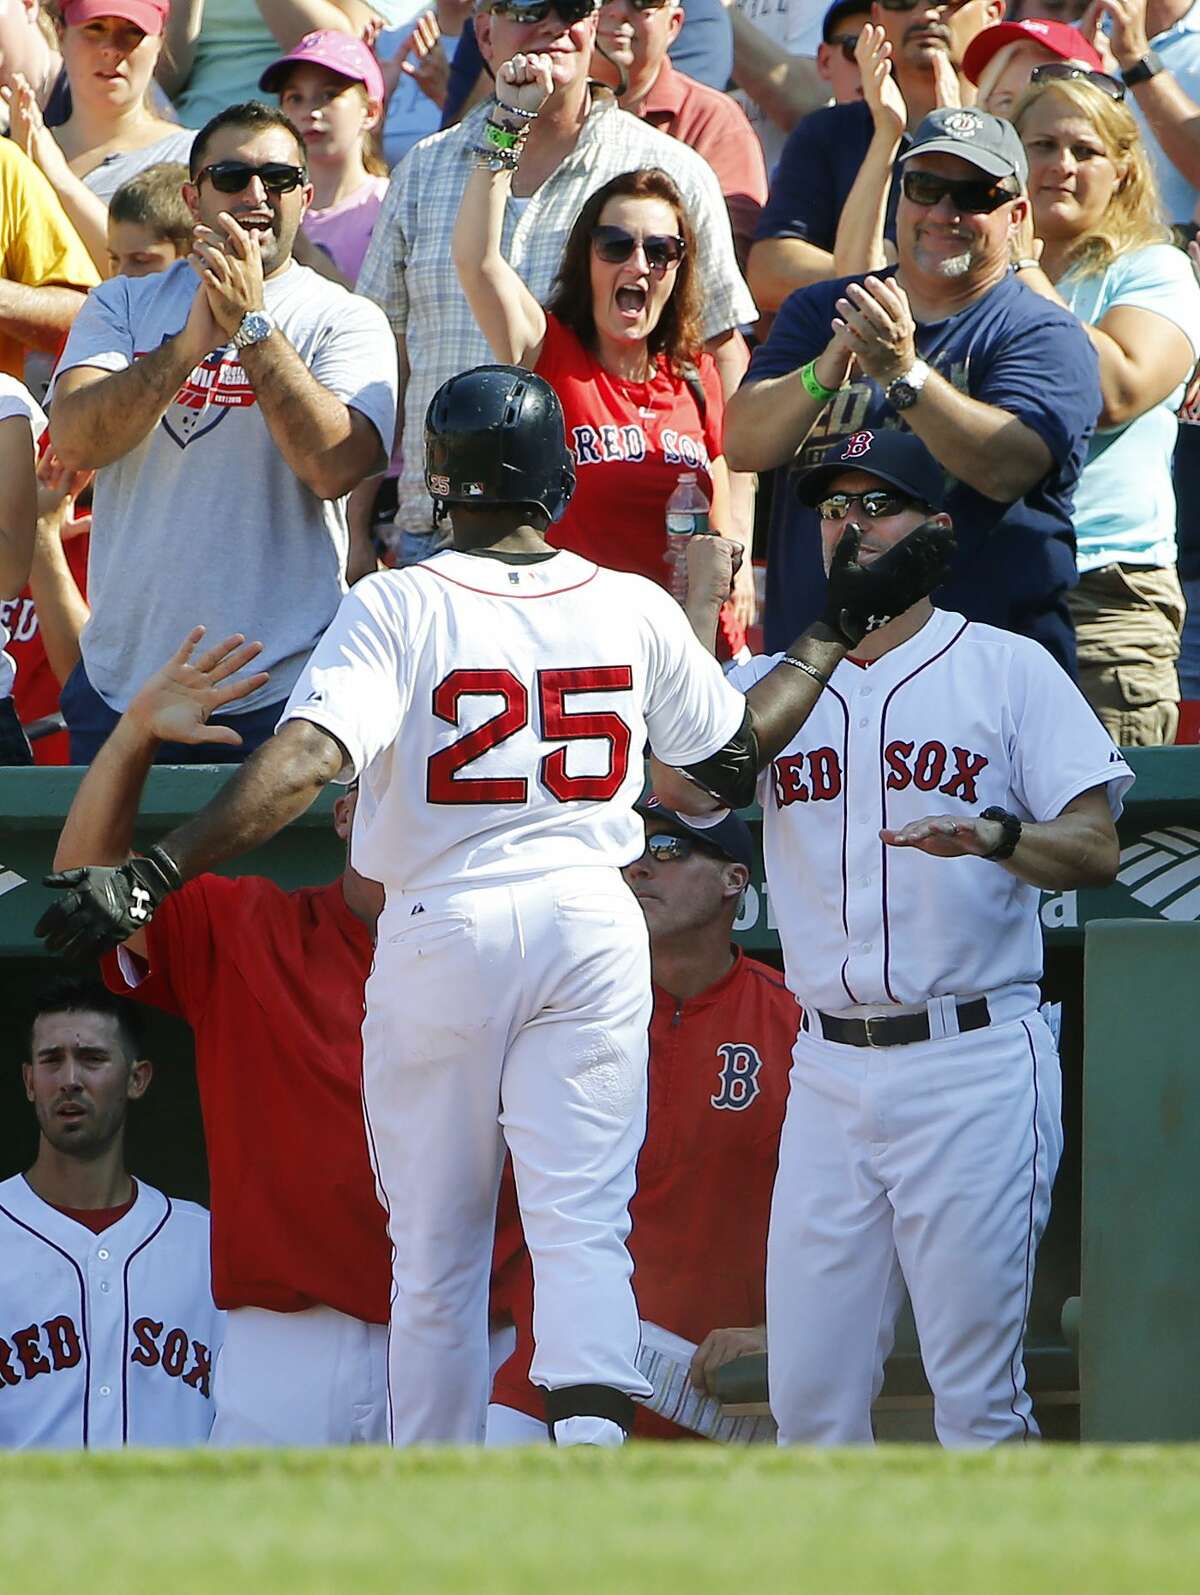 Fans cheer as Red Sox outfielder Jackie Bradley Jr. (25) is congratulated by interim manager Torey Lovullo after hitting a two-run home run against the Toronto Blue Jays Monday at Fenway Park in Boston.